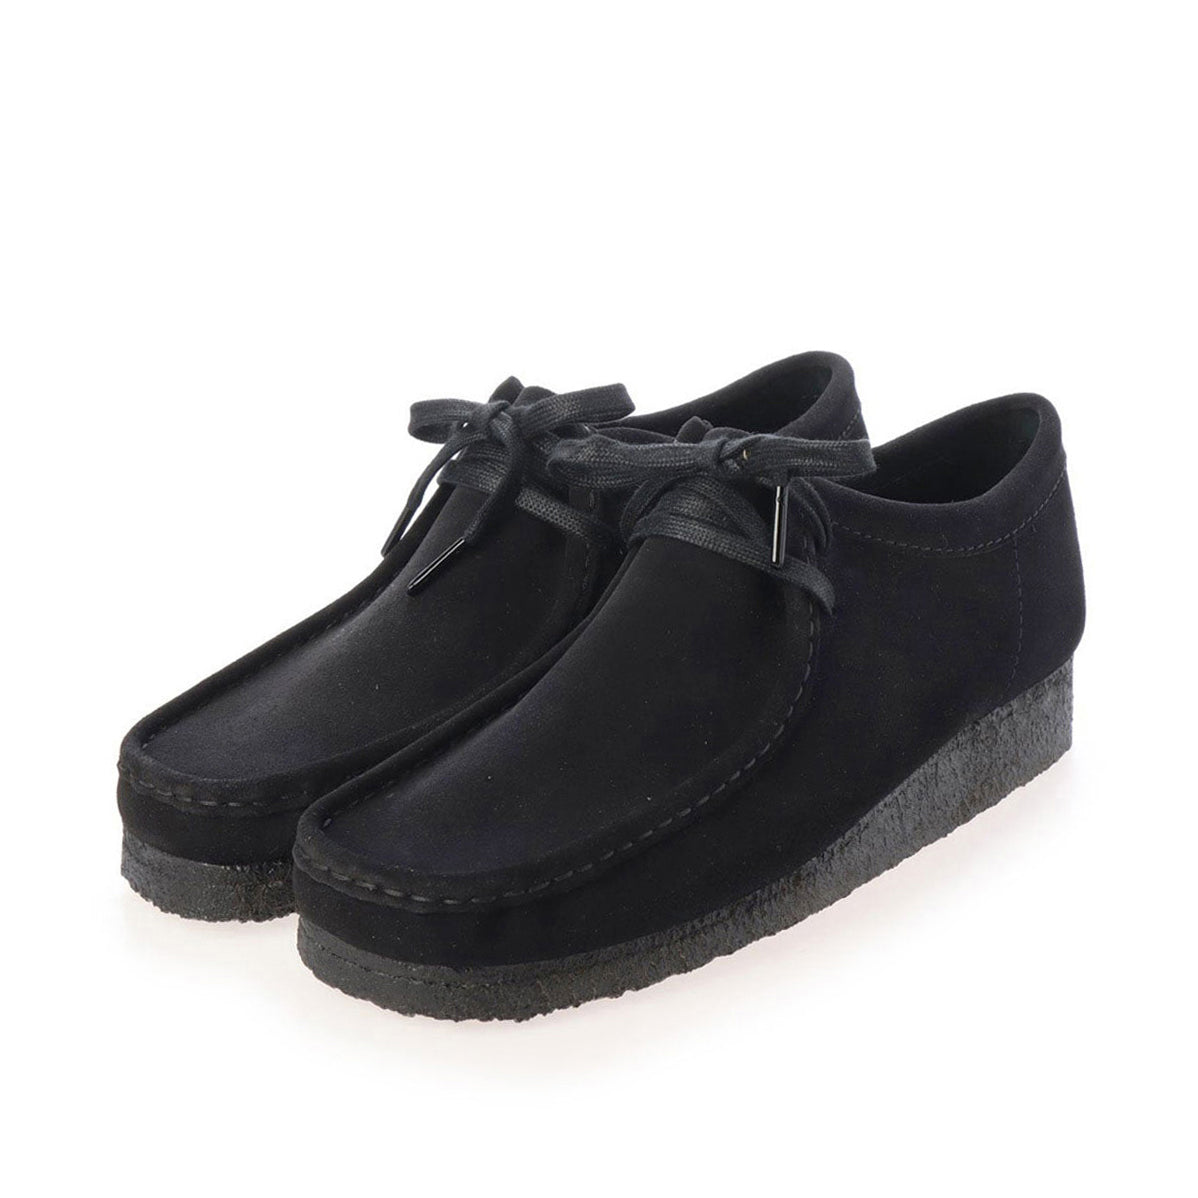 Clarks - Wallabee / Black Suede｜UP NORTH ONLINE STORE